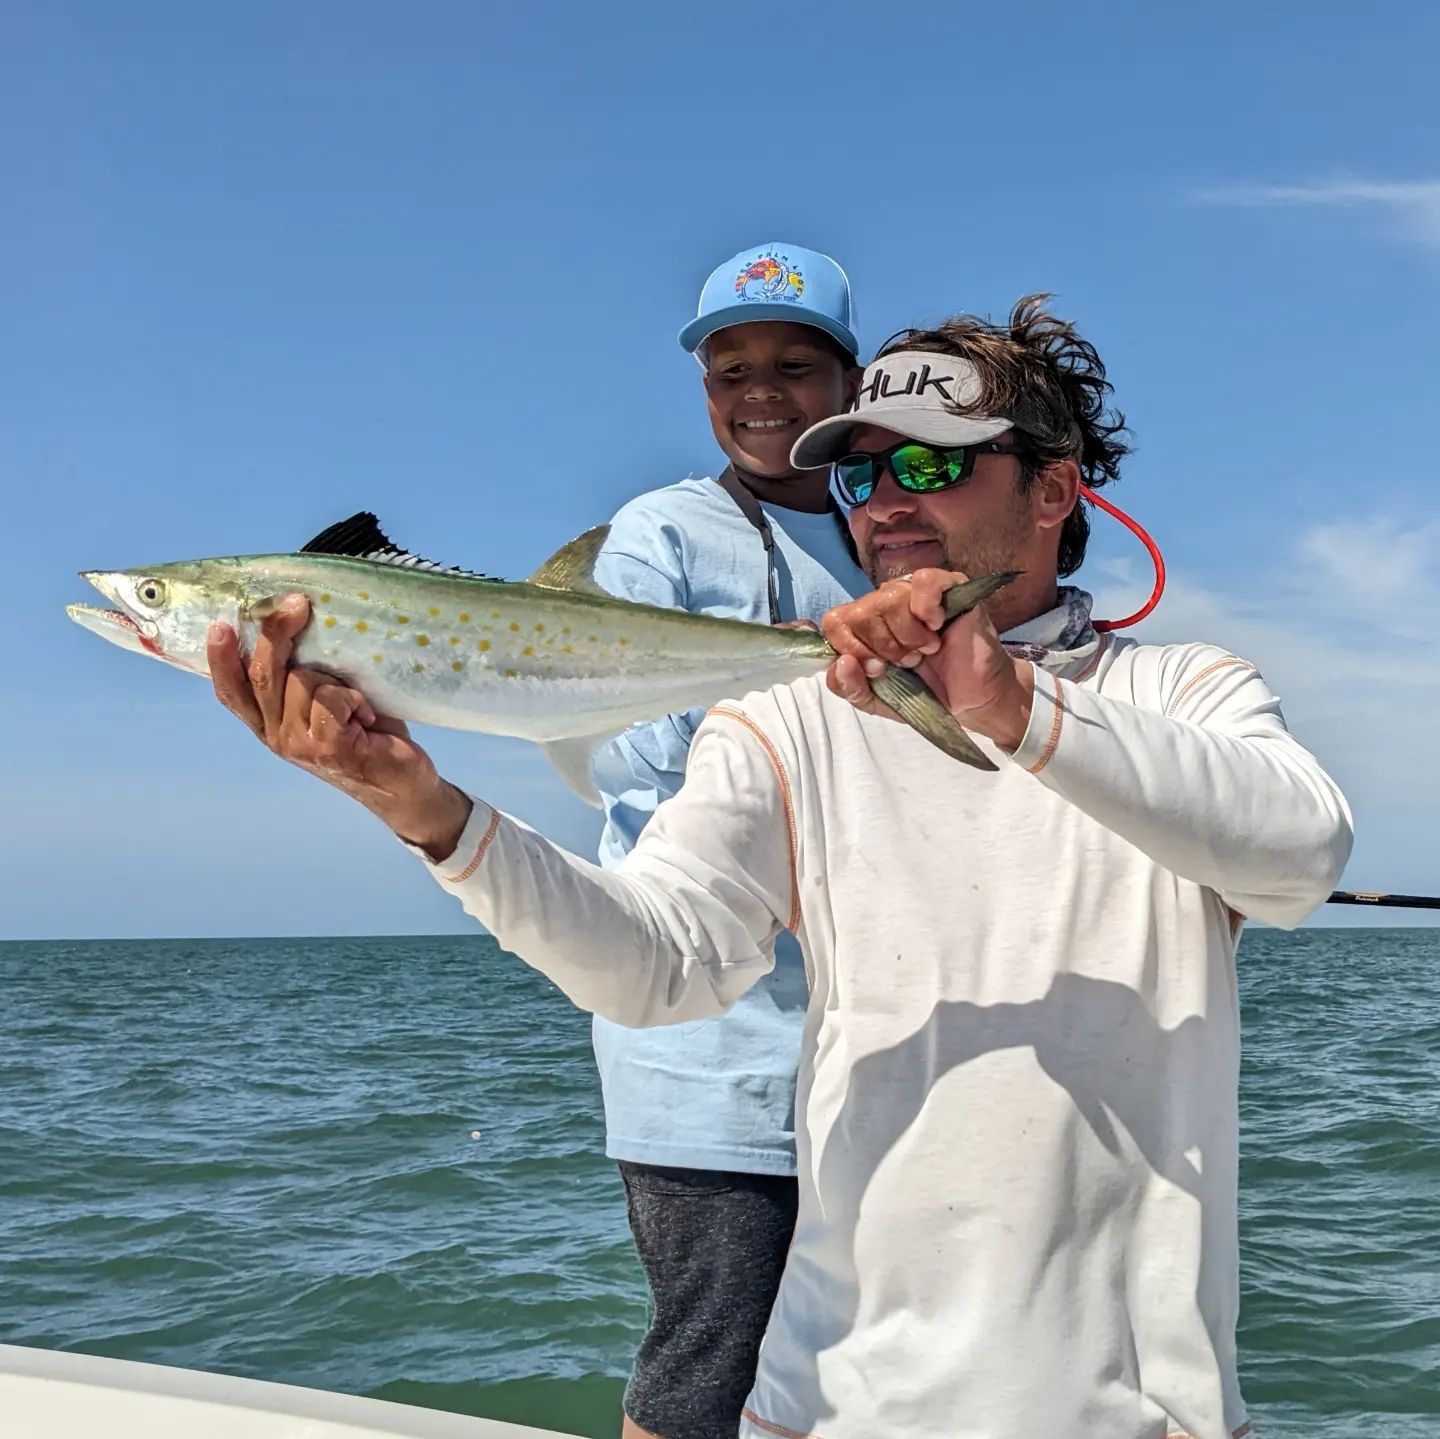 Is there any better kids species than a Spanish Mack?  From the tug, to the pull, to the teeth. This fish is God's gift to fishing guides and dads!!!! #florida #floridalife #floridafishing #discovercrystalriver #crystalriverfishing #crystalriverfishing #spanishmackerel #kidsfishing #discovercrystalriver #pathfinderboats #orvisflyfishing #simmsfishing #sodiumfishinggear #petespiermarina #plantationoncrystalriver #winning #realsaltlife